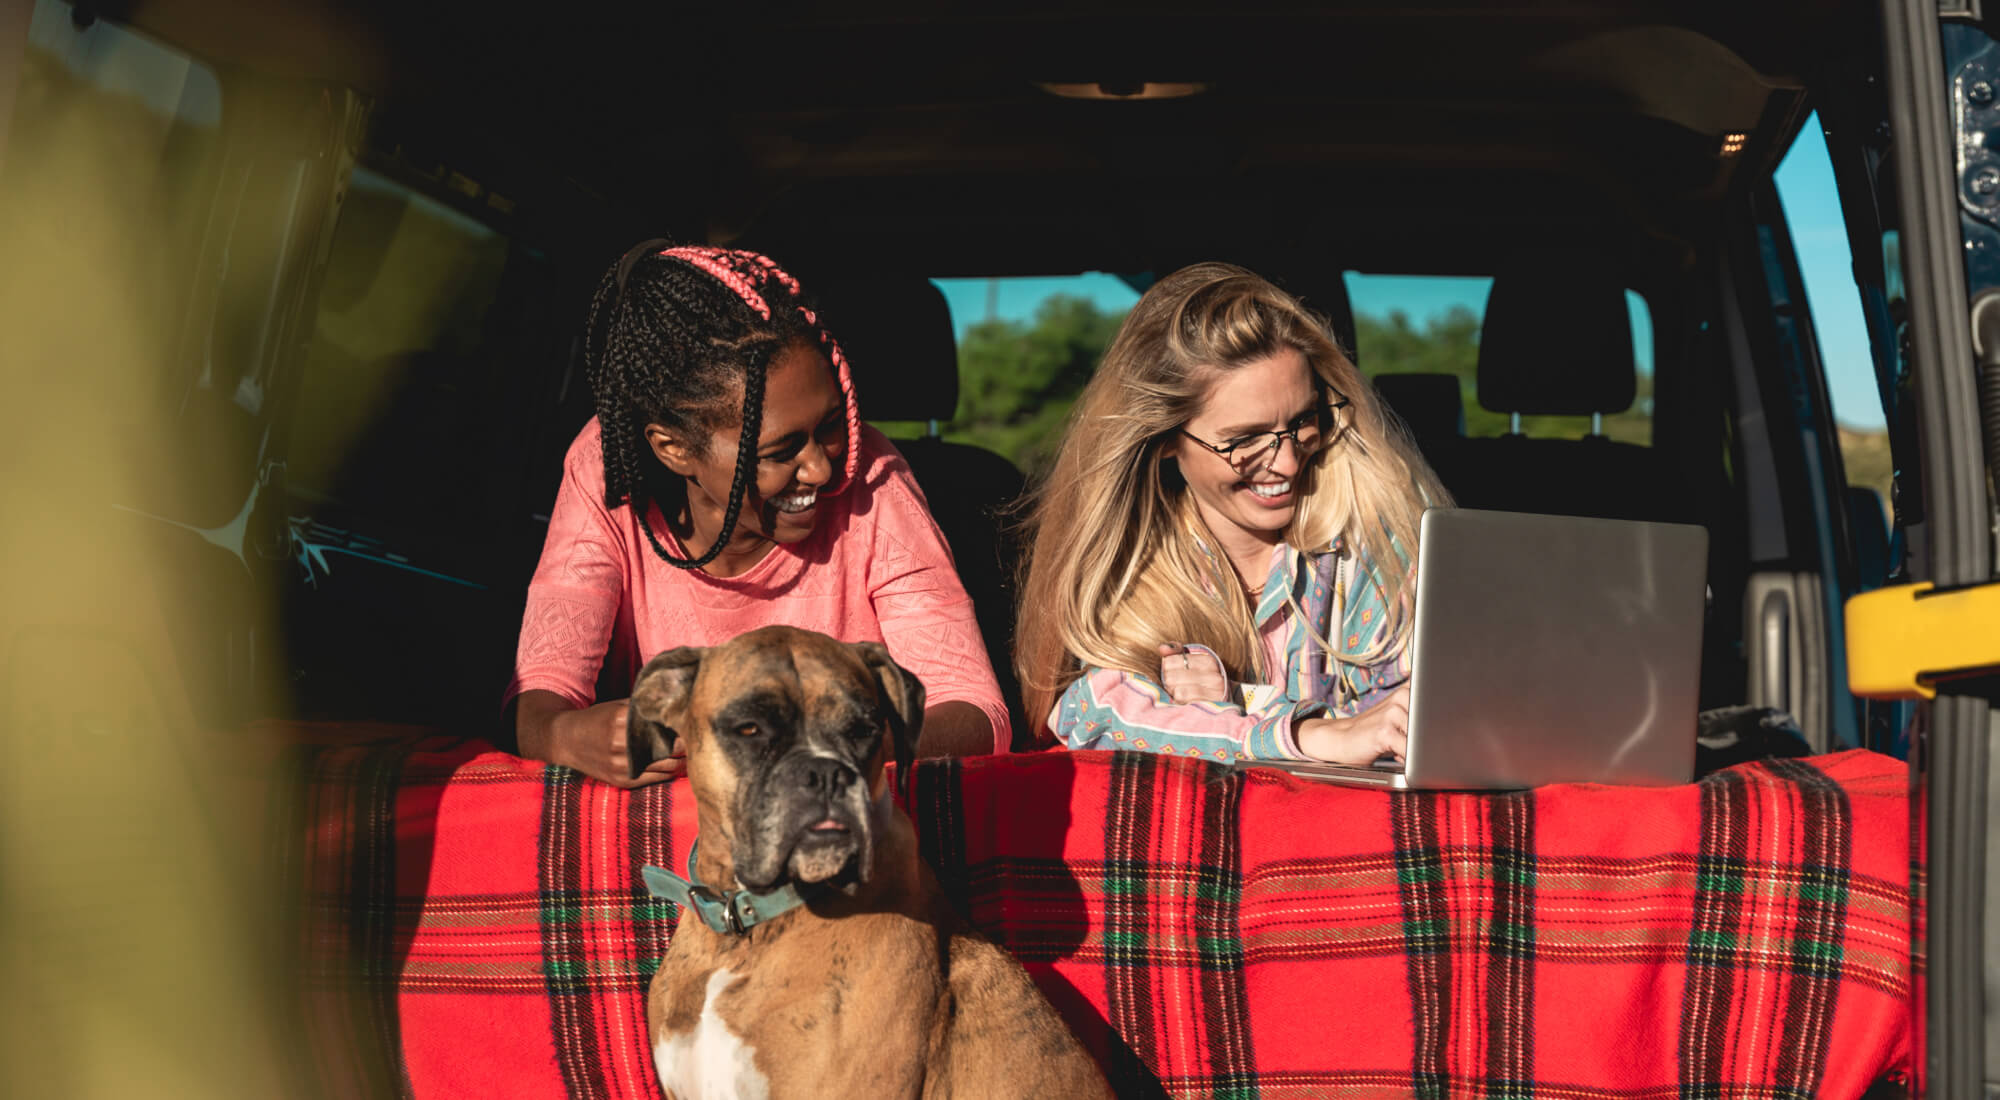 Boxer dog sitting in back of car with two women watching a laptop